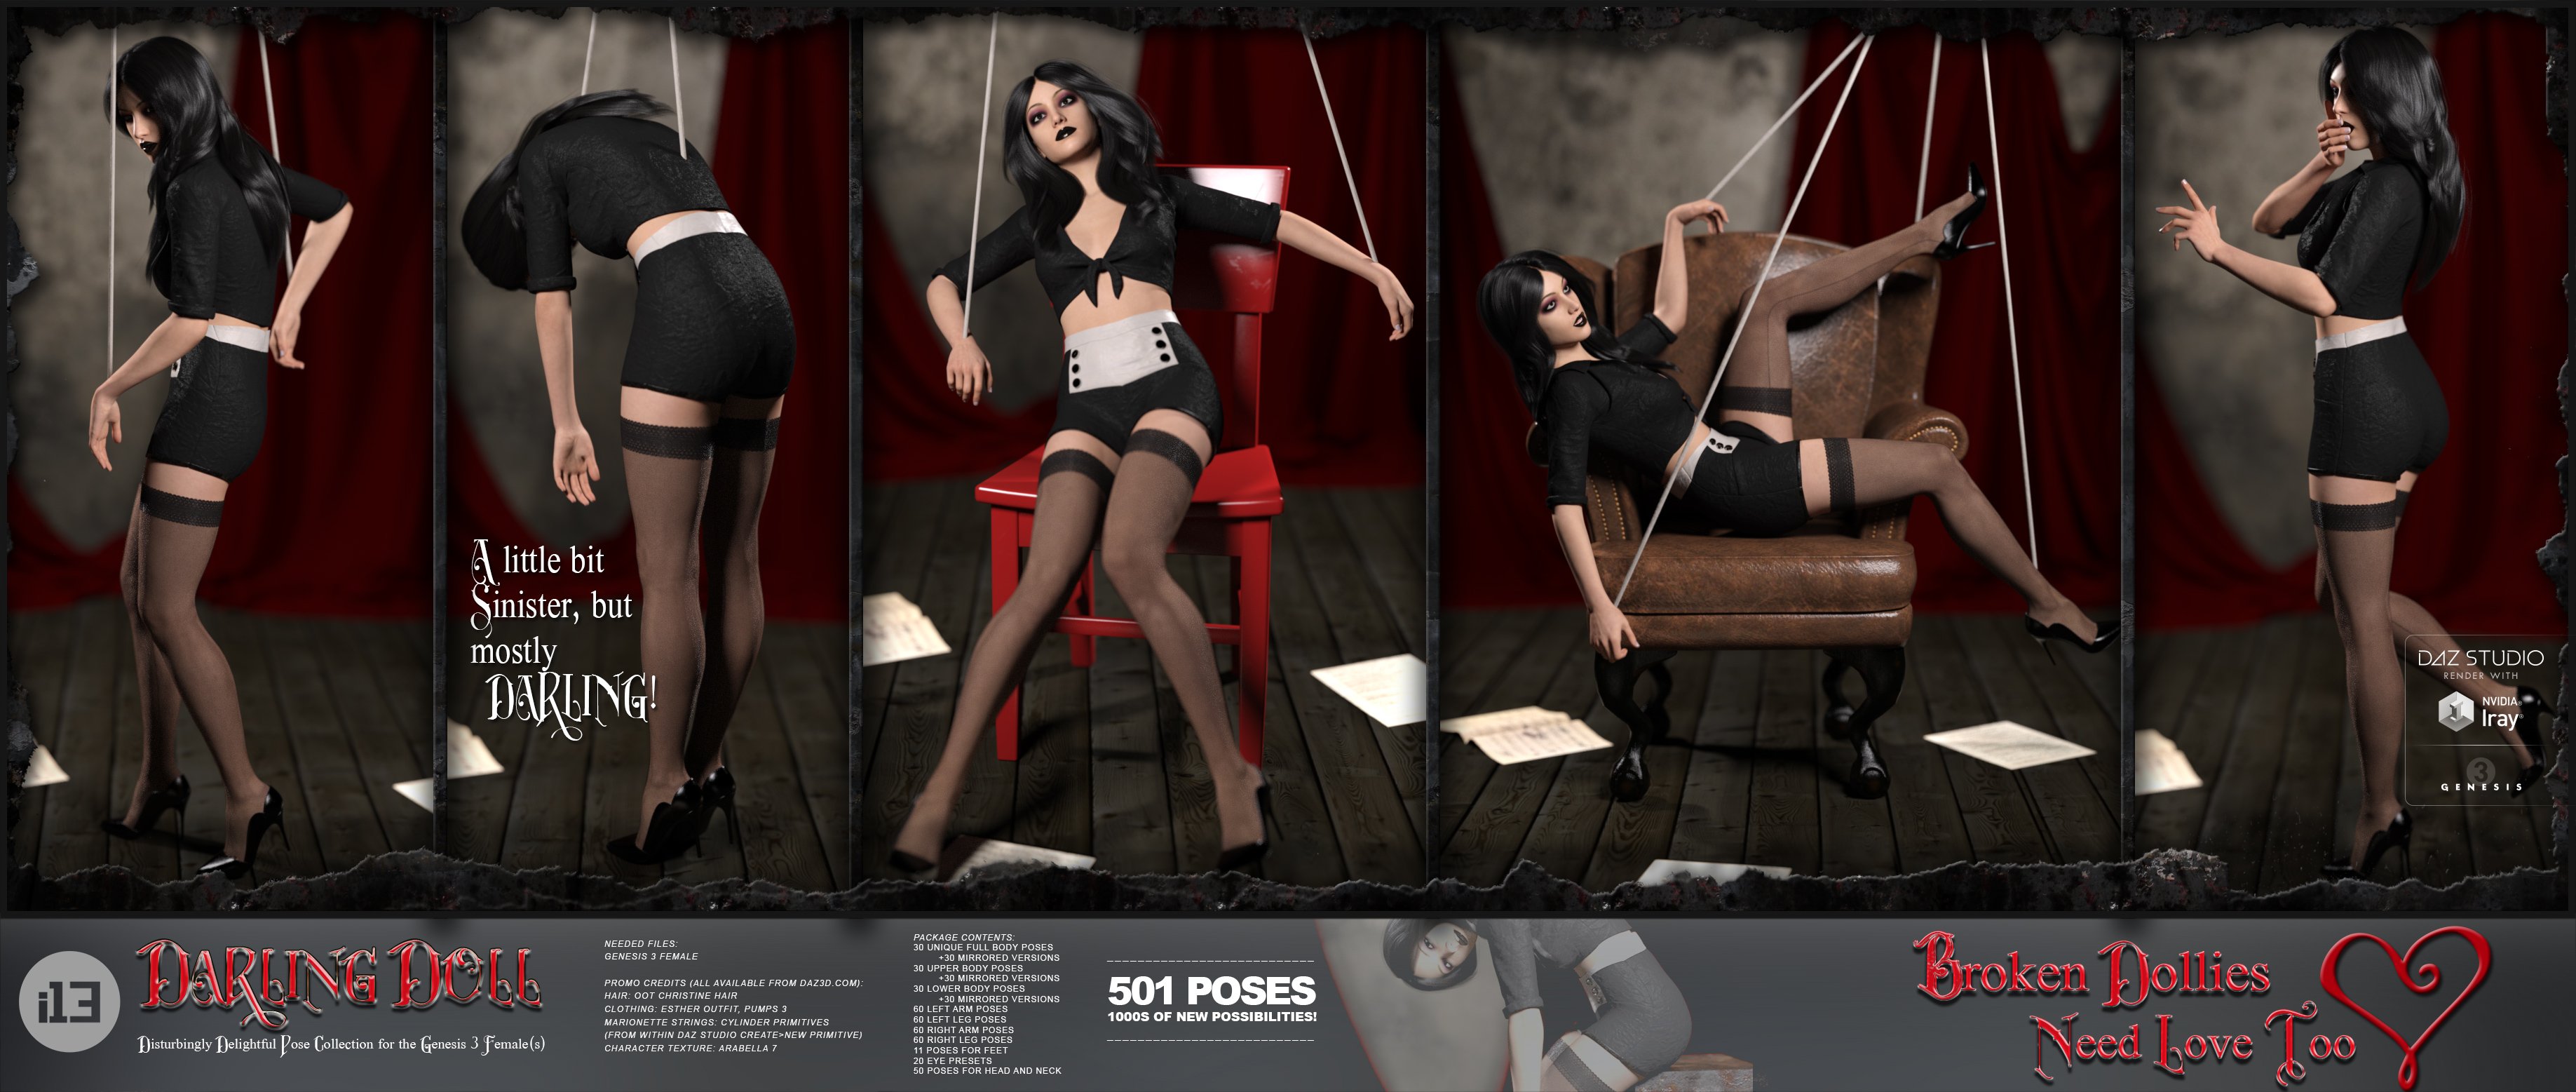 i13 Darling Doll Poses by: ironman13, 3D Models by Daz 3D